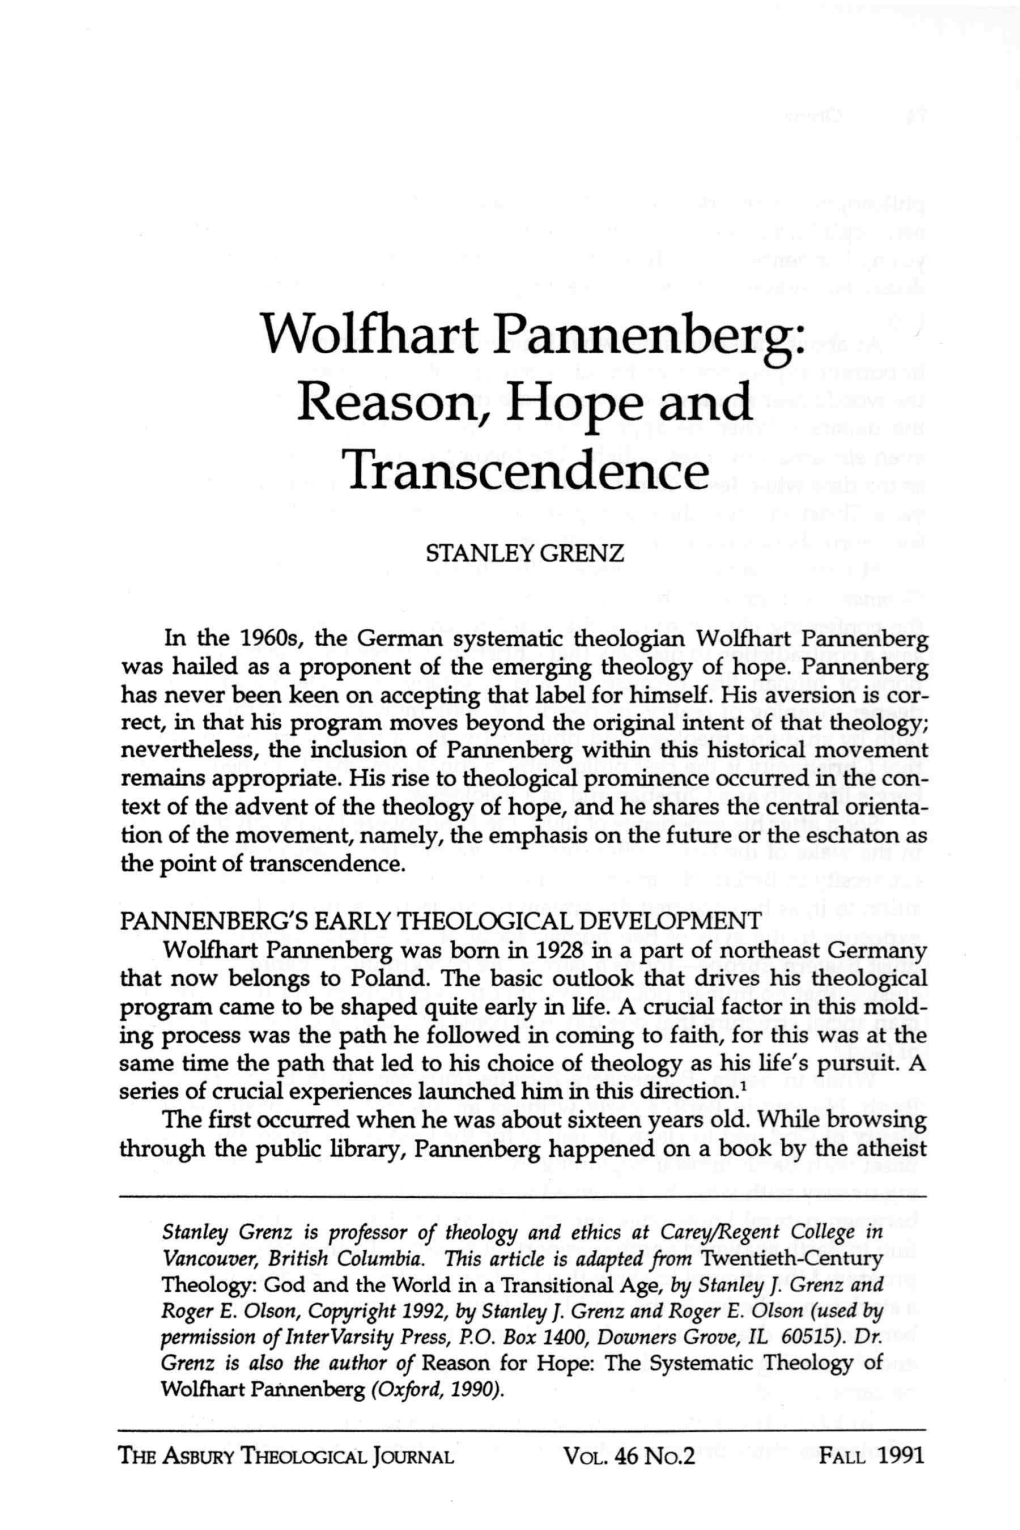 Wolfhart Pannenberg: Reason, Hope and Transcendence